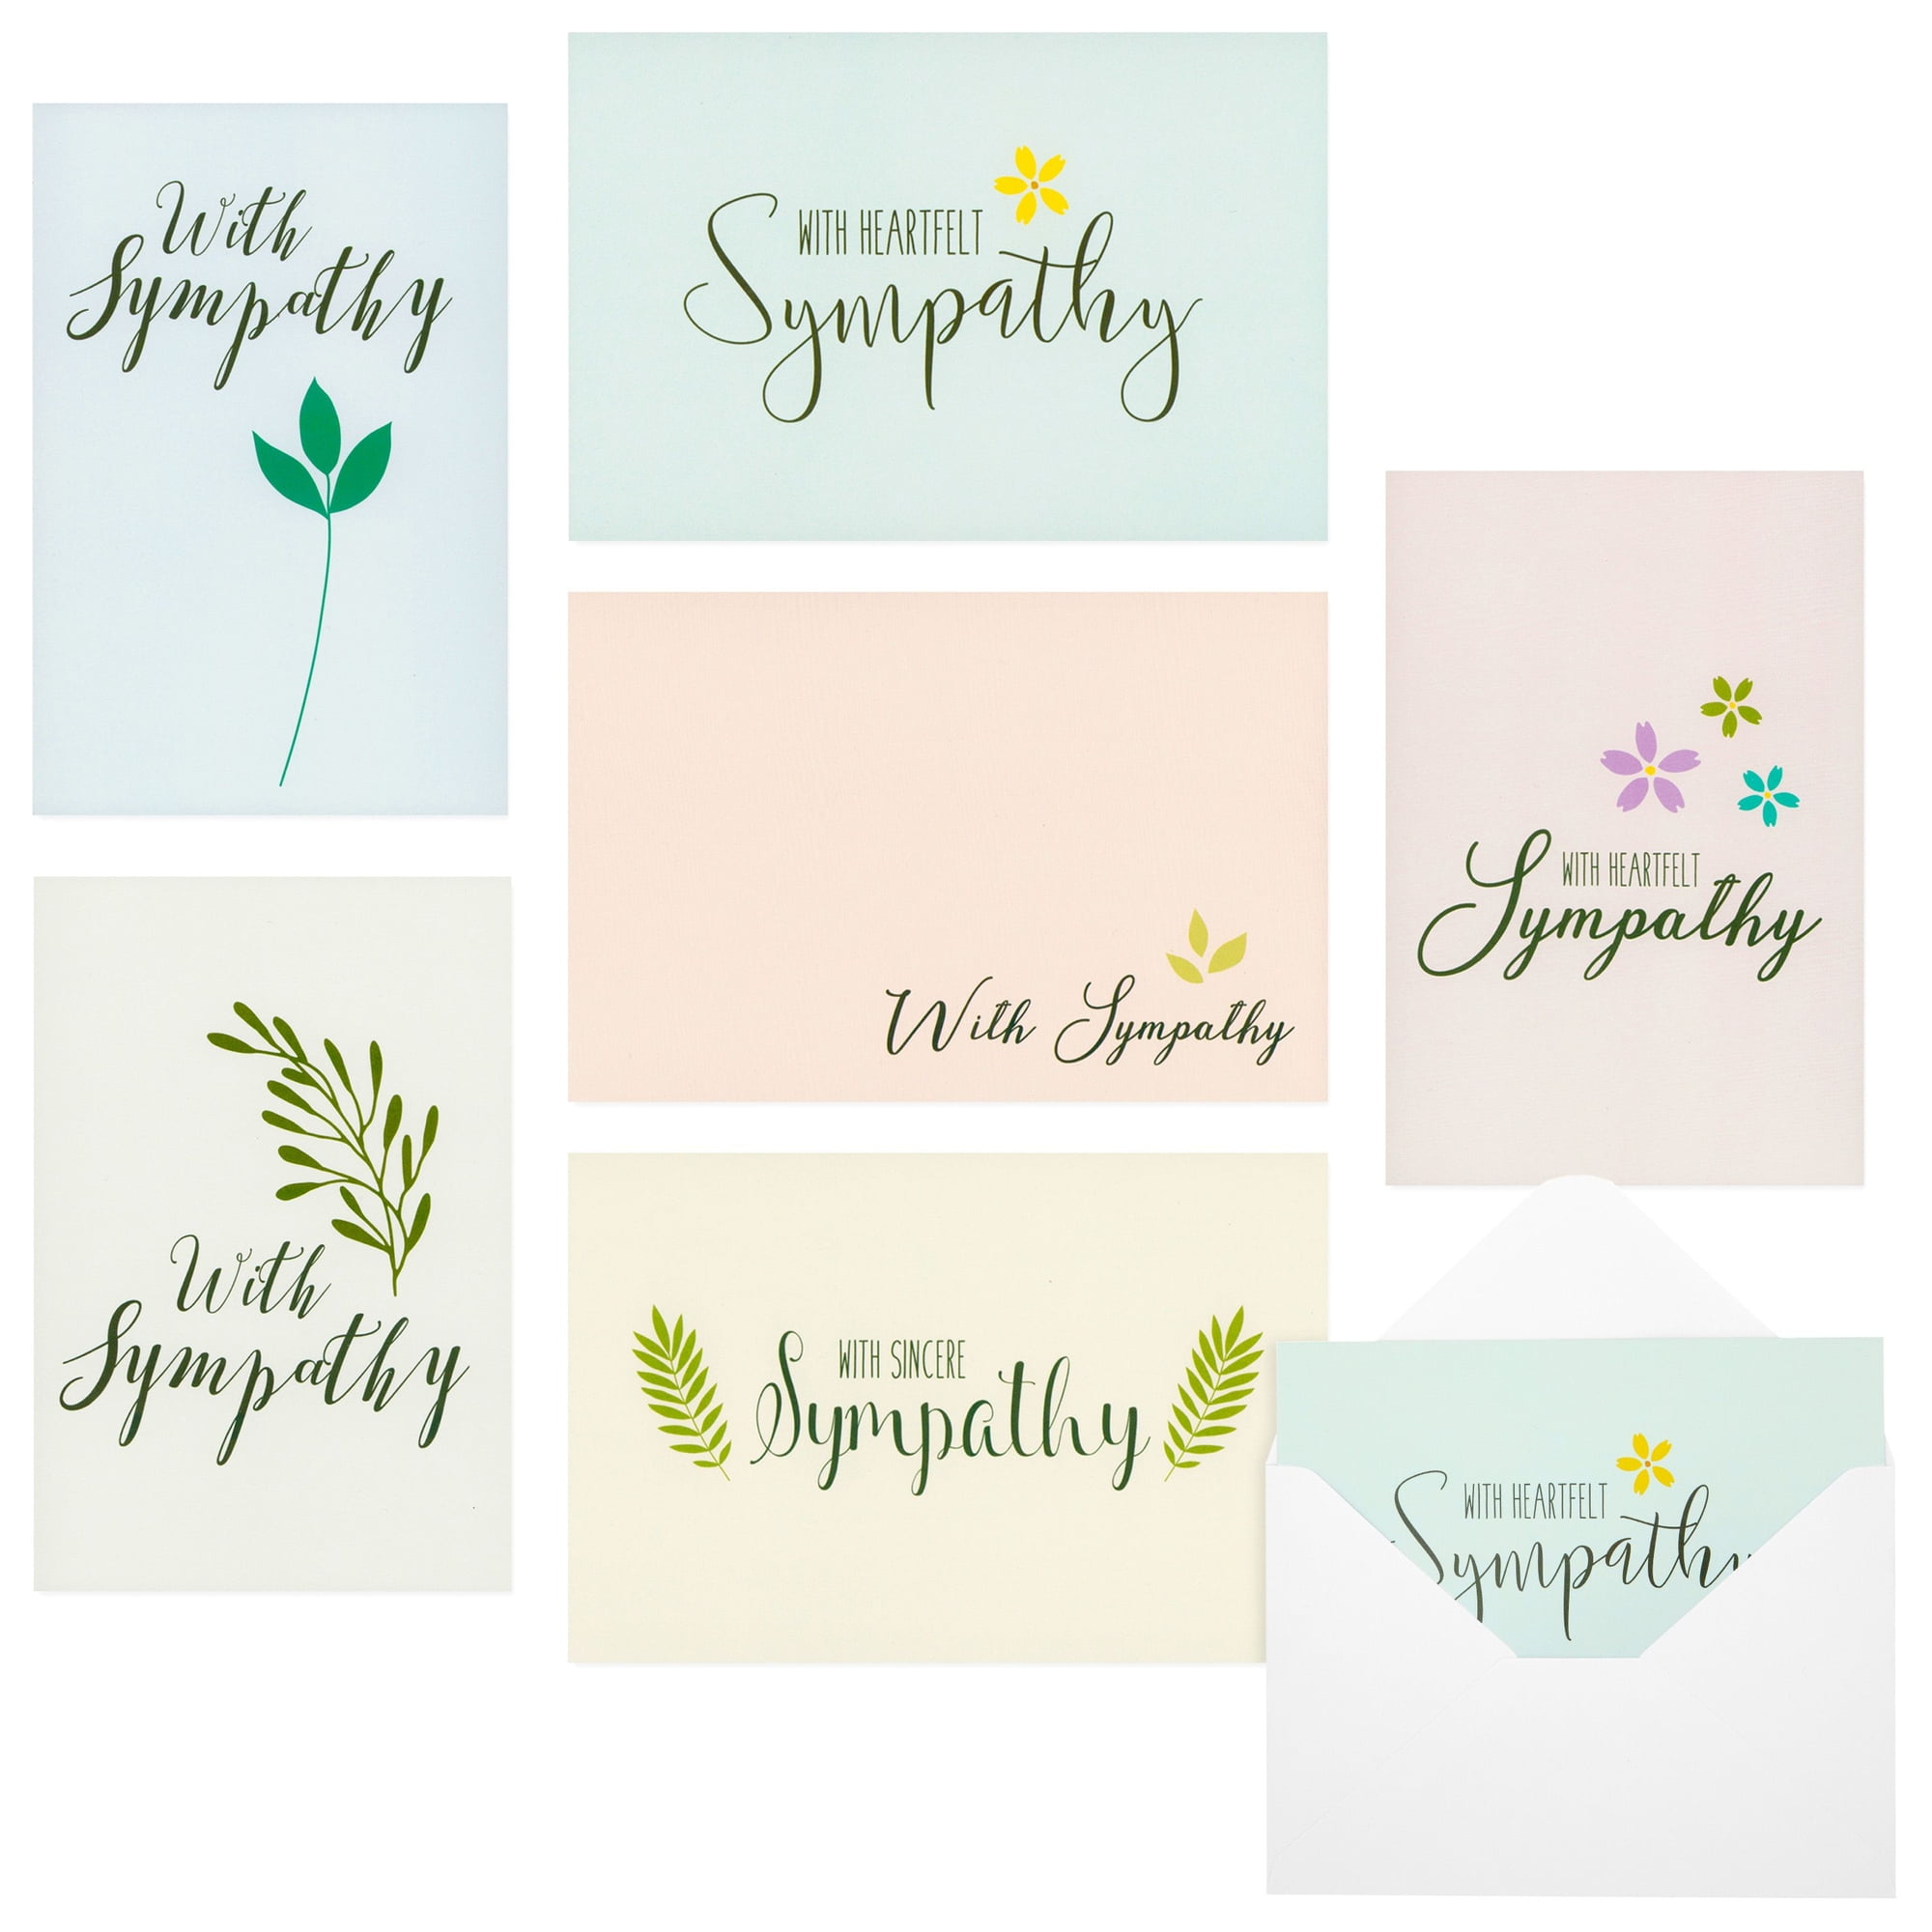 Wholesale Set of 30 4x6” 30 Sympathy Cards with Envelopes for your